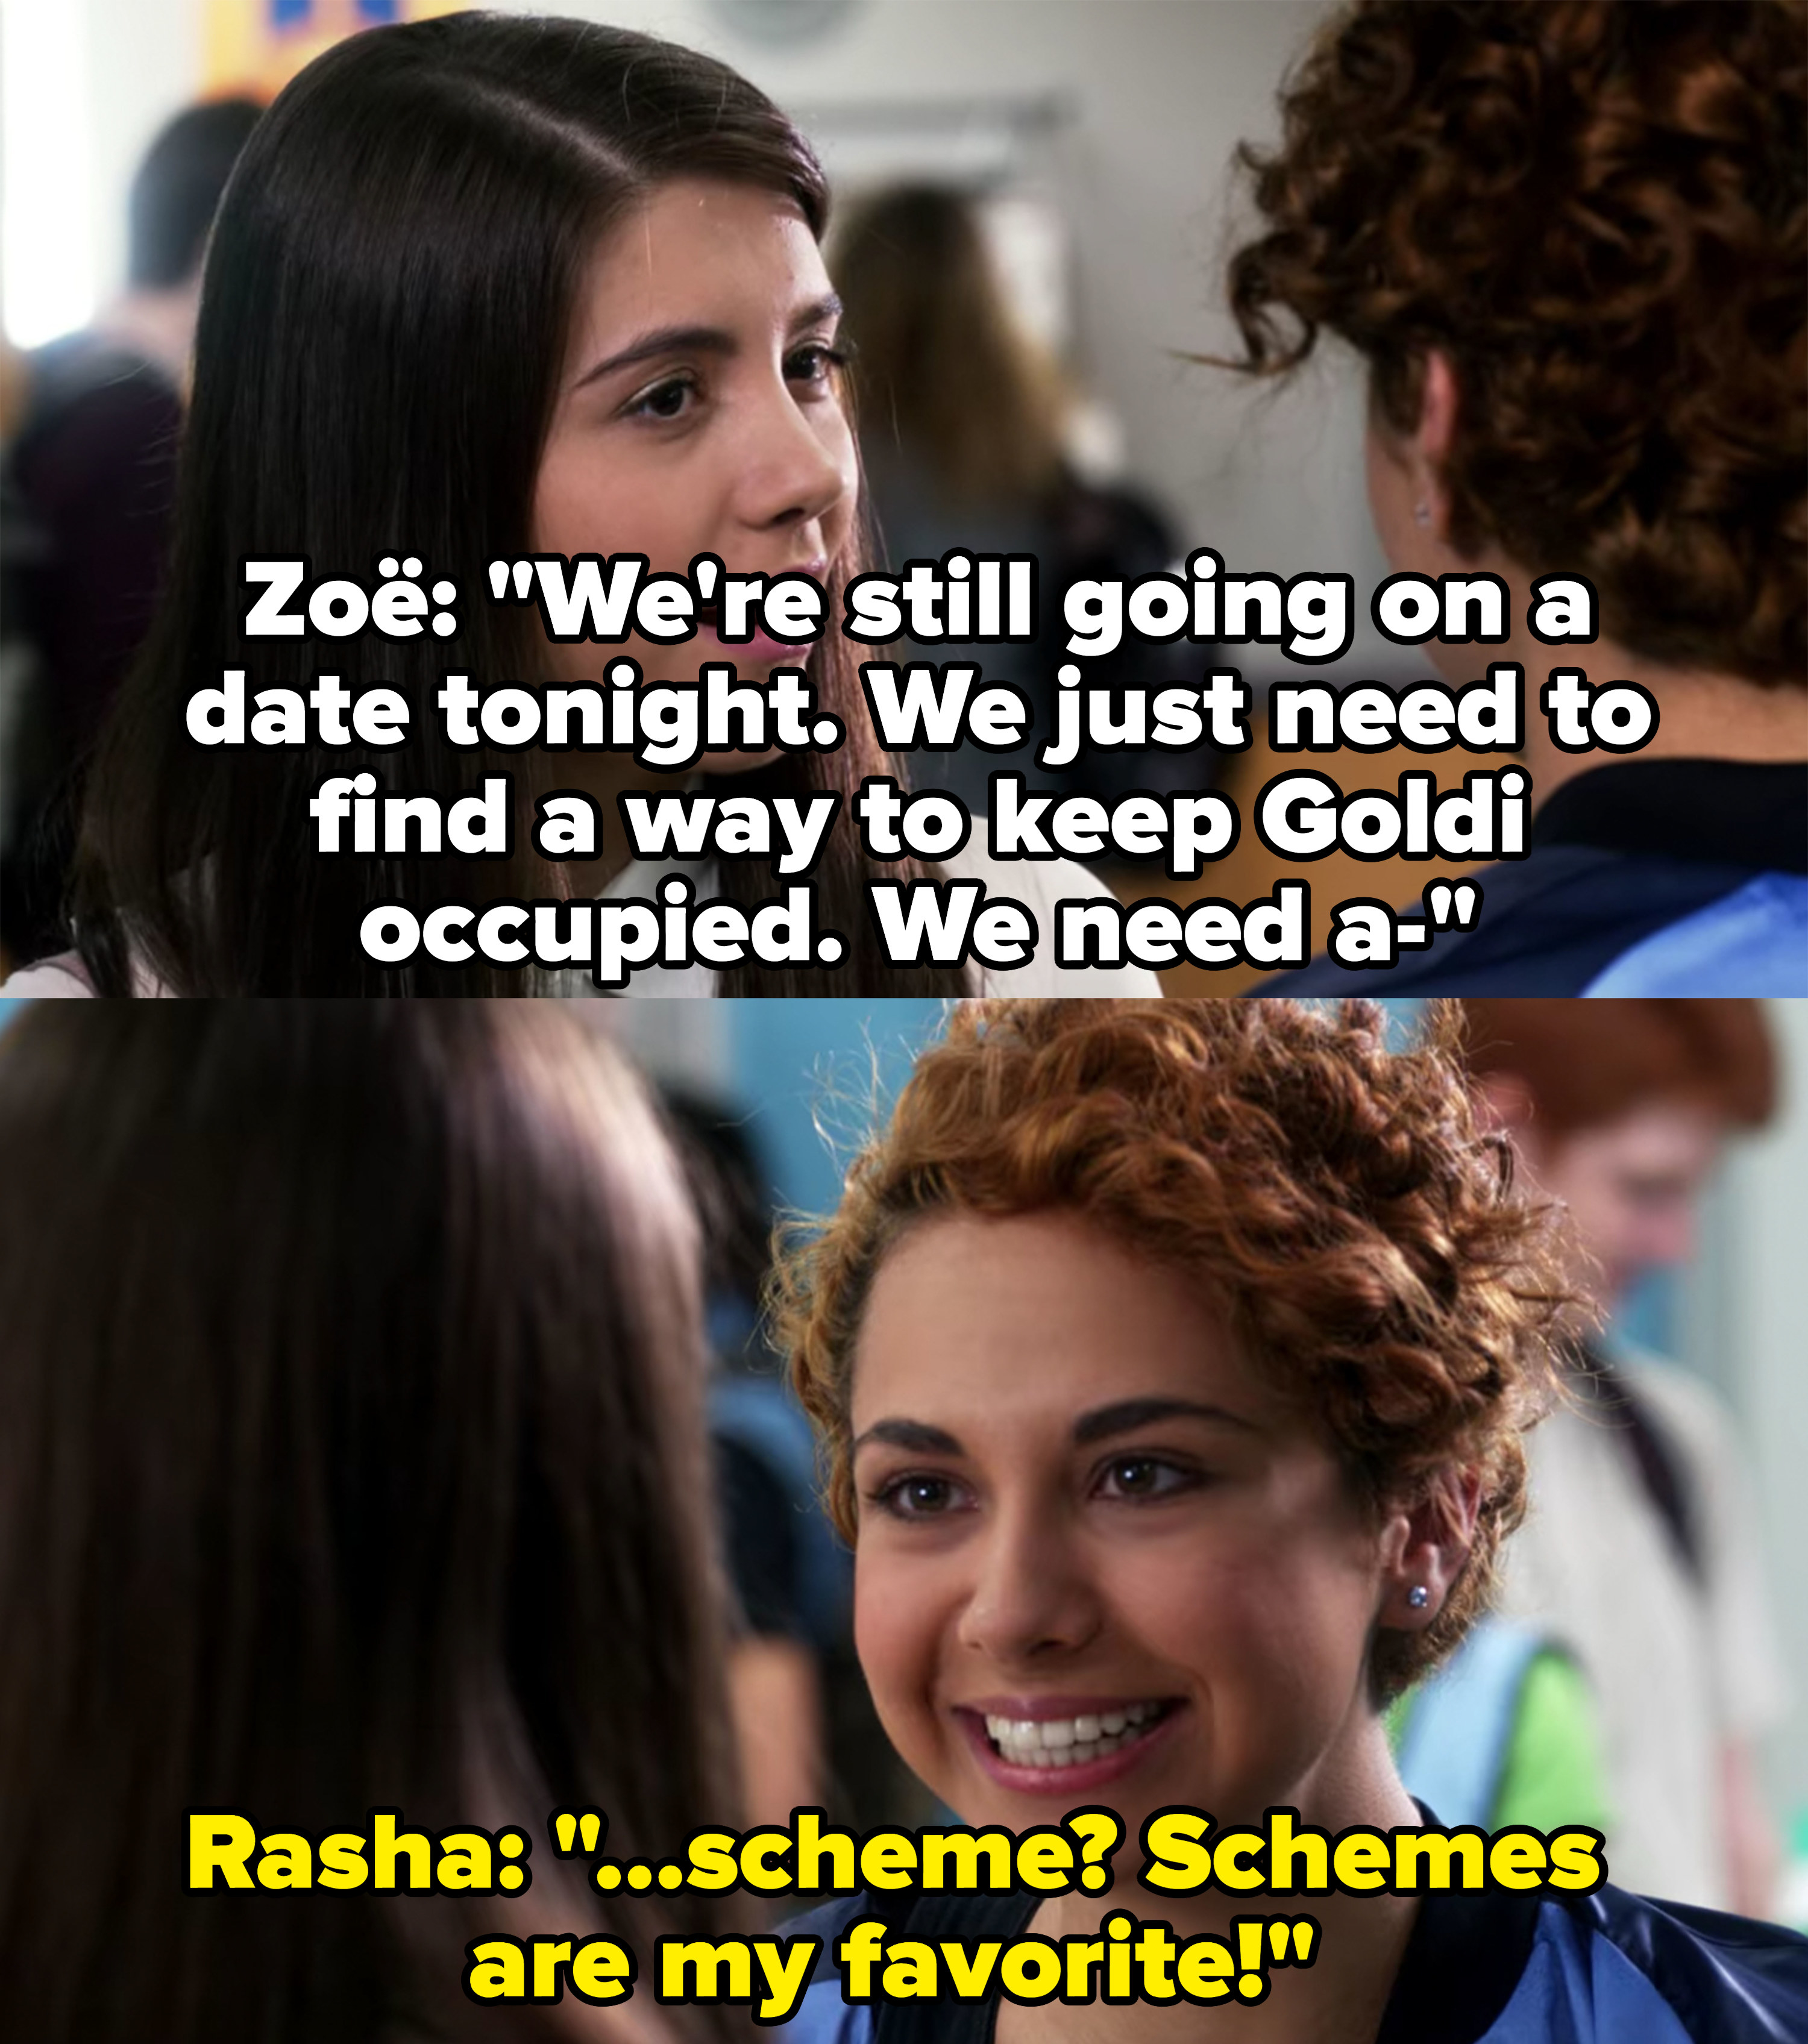 Zoë says they&#x27;re still going on their date but just need to find a way to distract Goldi, Rasha says schemes are her favorite